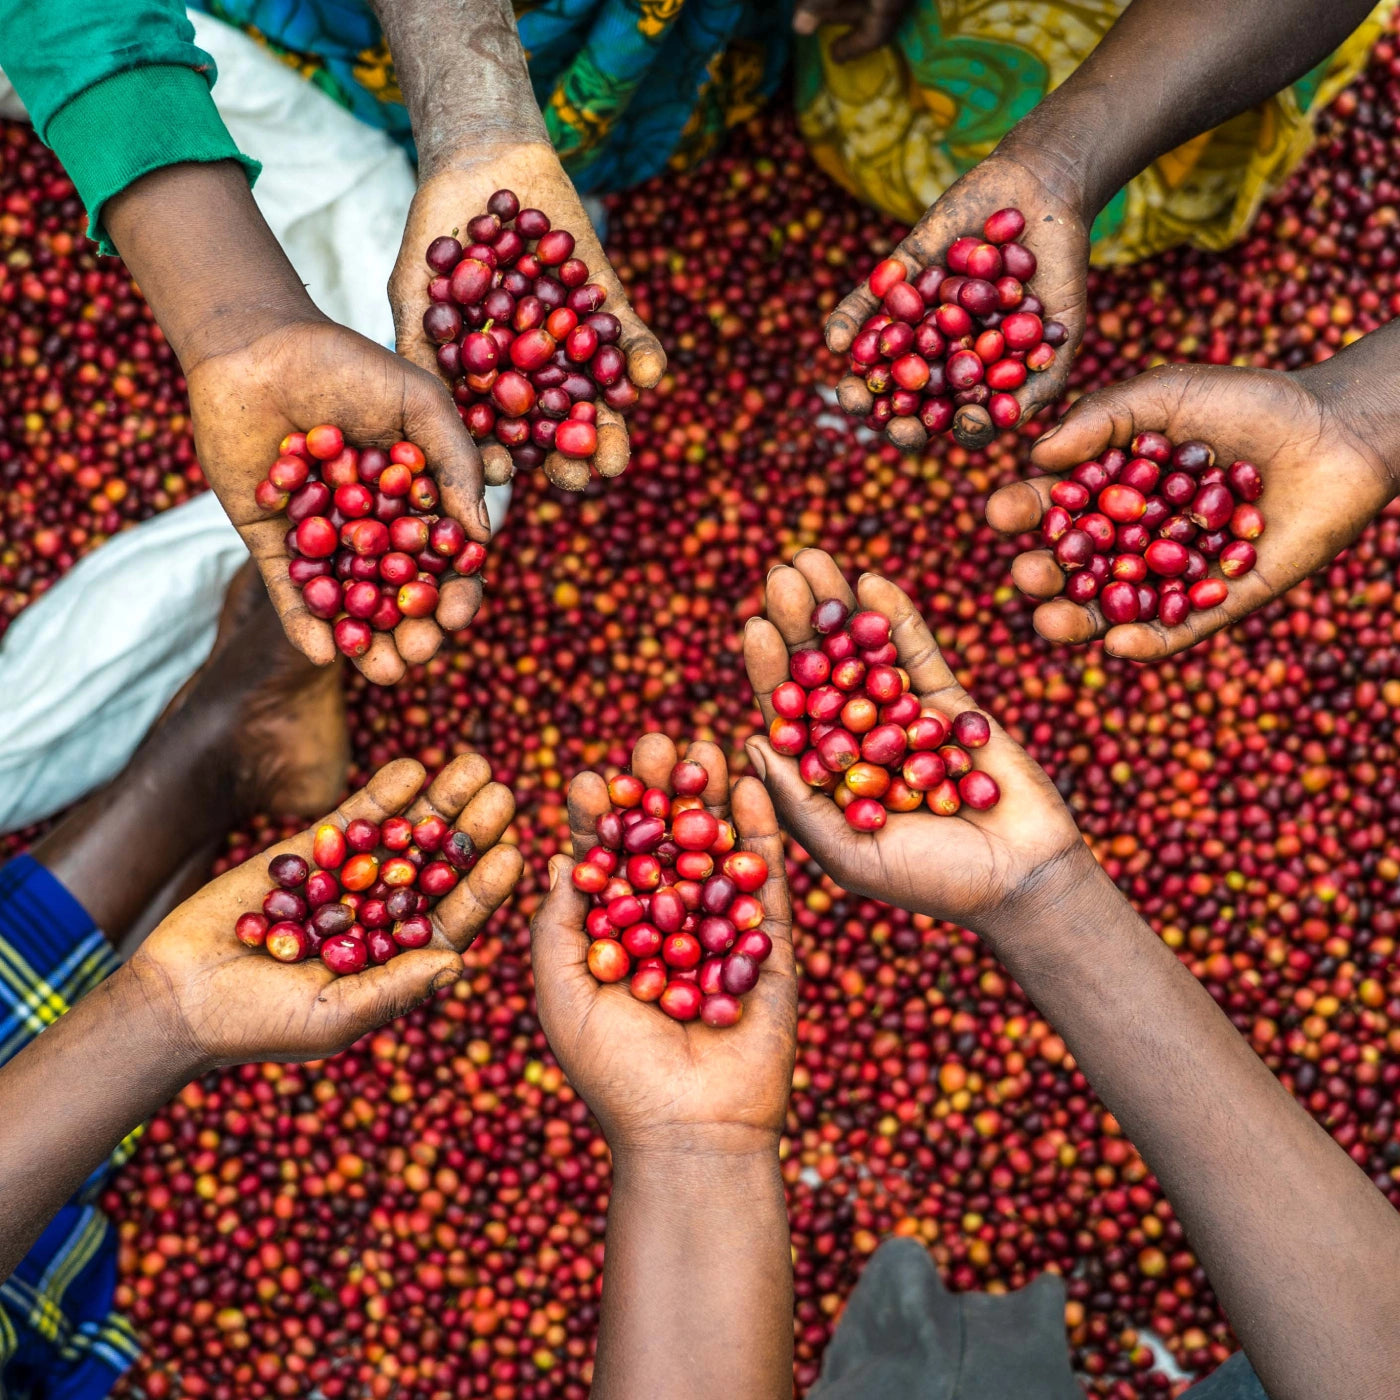 Several hands displaying ripe red specialty coffee cherries that eventually become Uganda Kalingwe AA by Glen Lyon Coffee Roasters